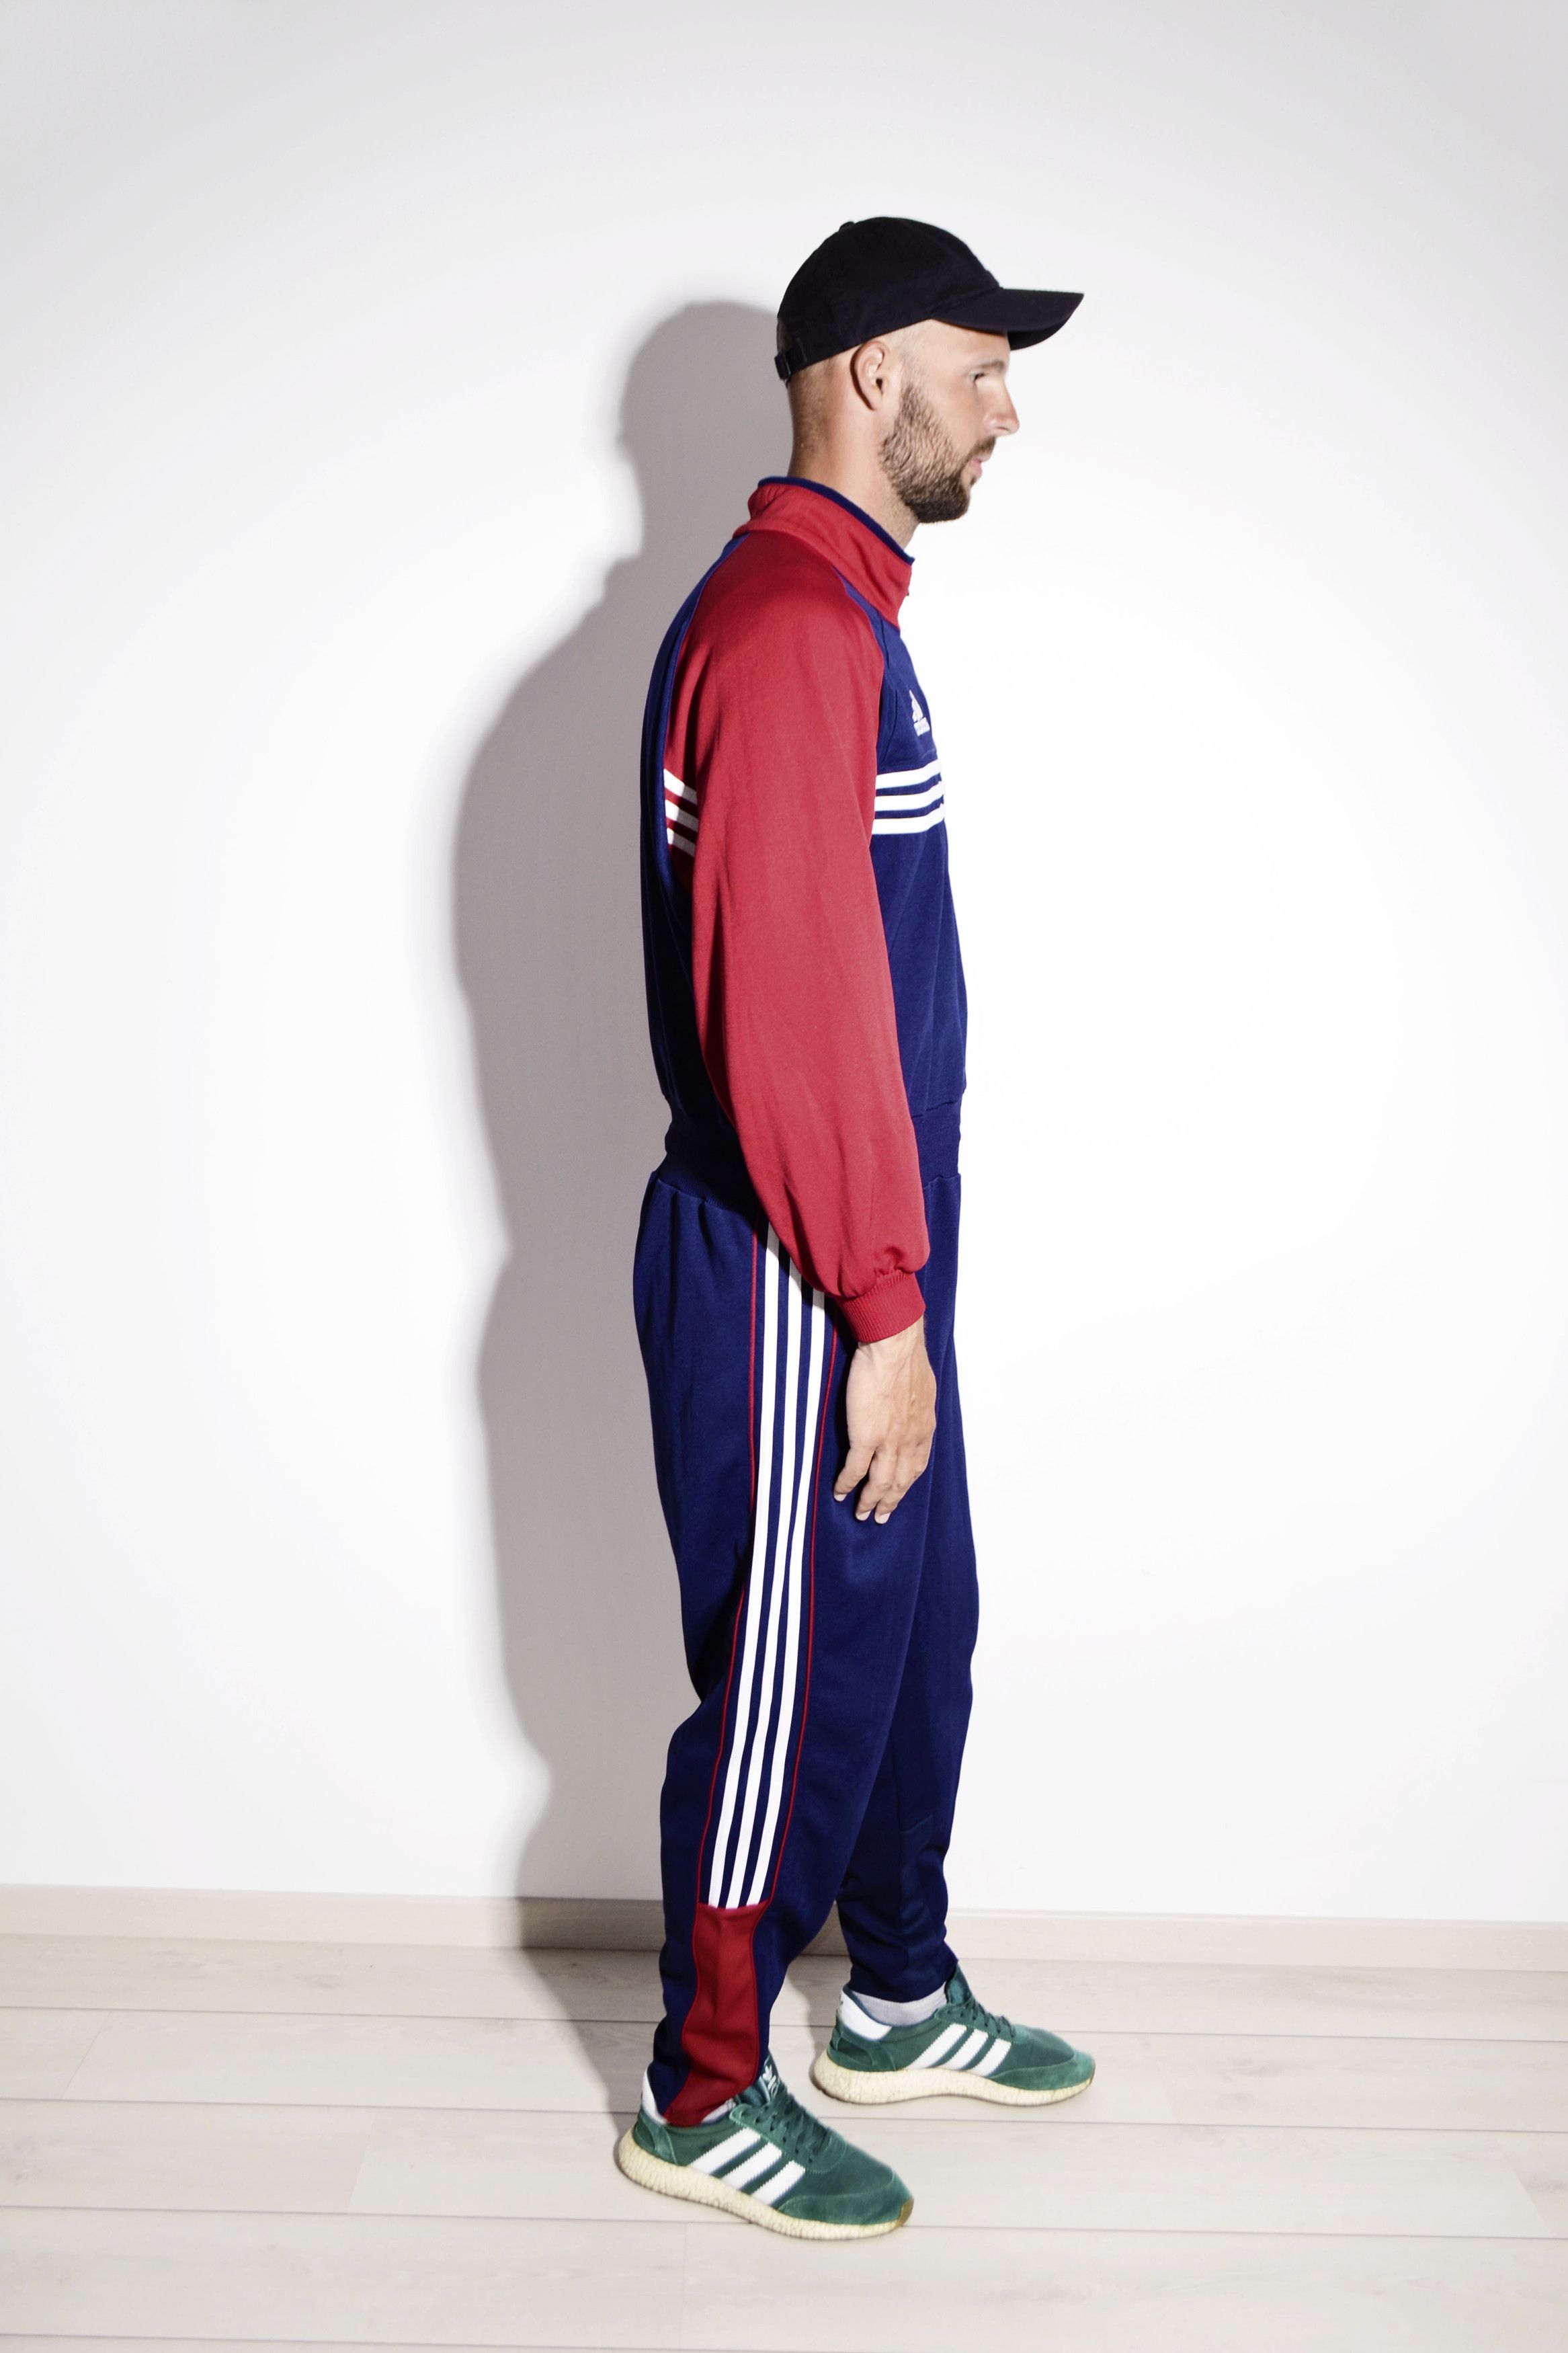 Adidas Vintage men sport onesie ADIDAS | 80s retro Old School overall full coverall jumpsuit sweatsuit one part piece tracksuit blue red | Large Size US 34 / EU 50 - 2 Preview